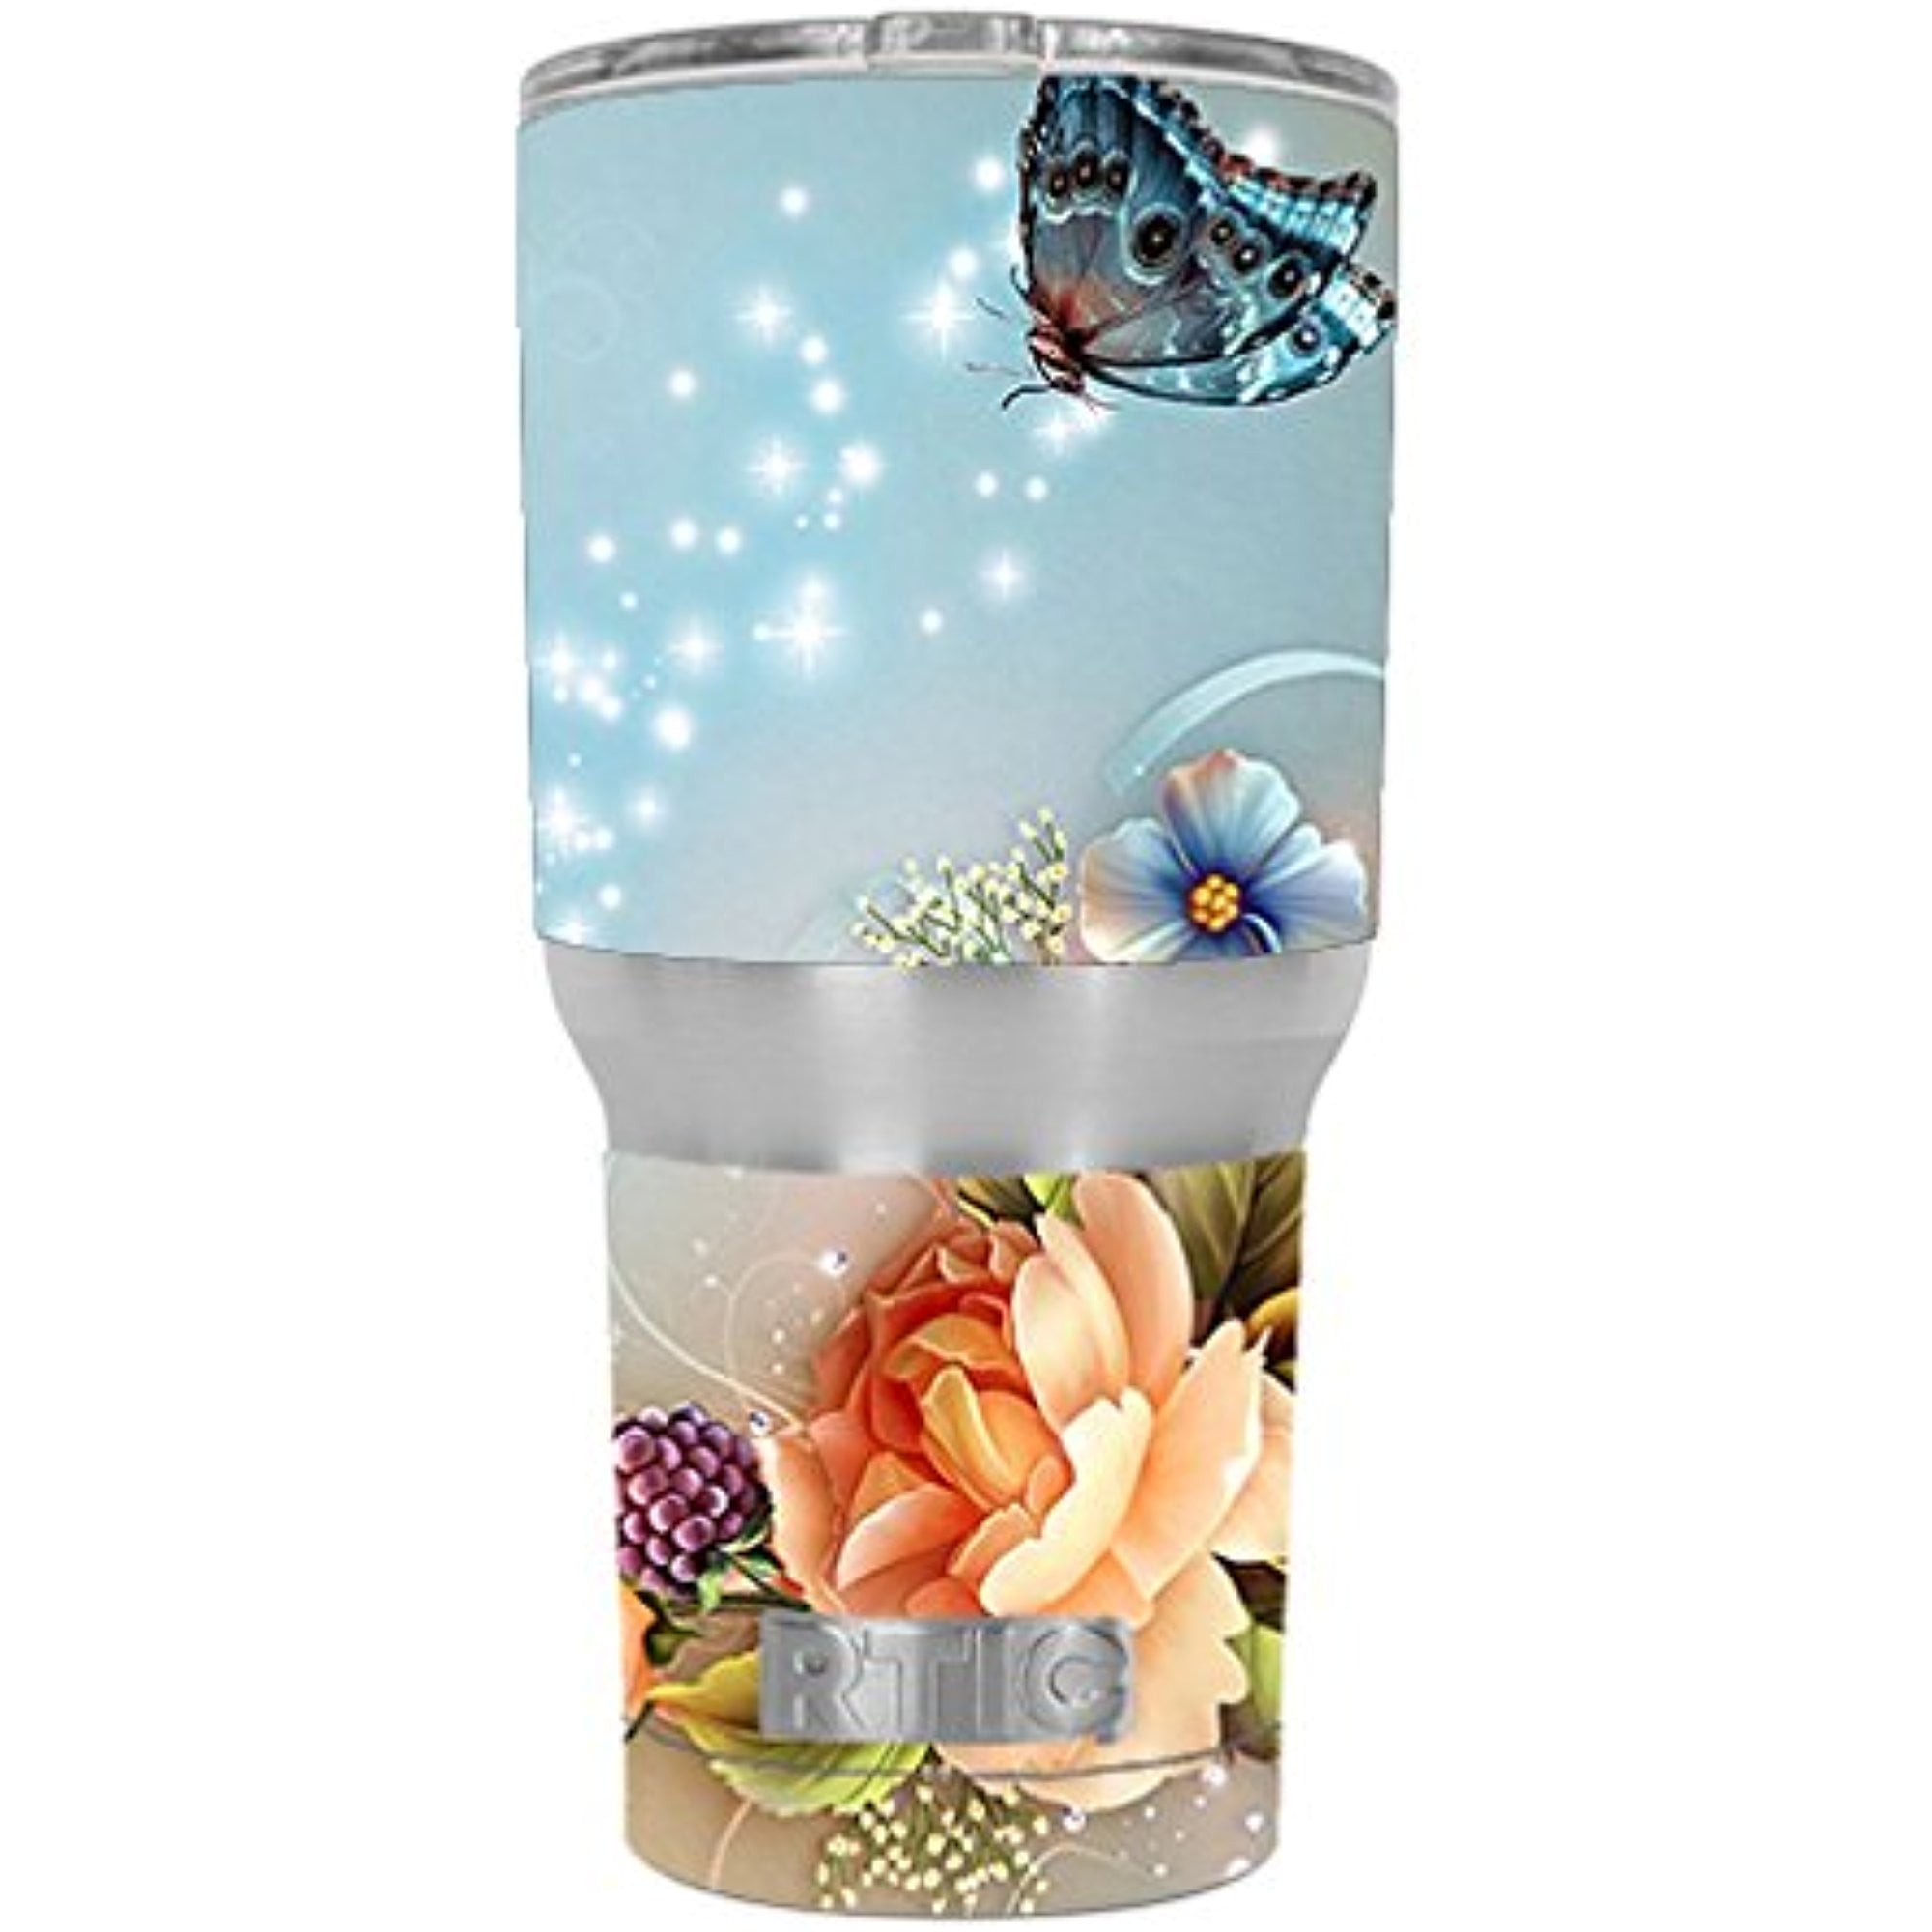 Butterfly Skin Decal for RTIC 30 oz Tumbler Cup / Floral Butterflies 6-piece kit 